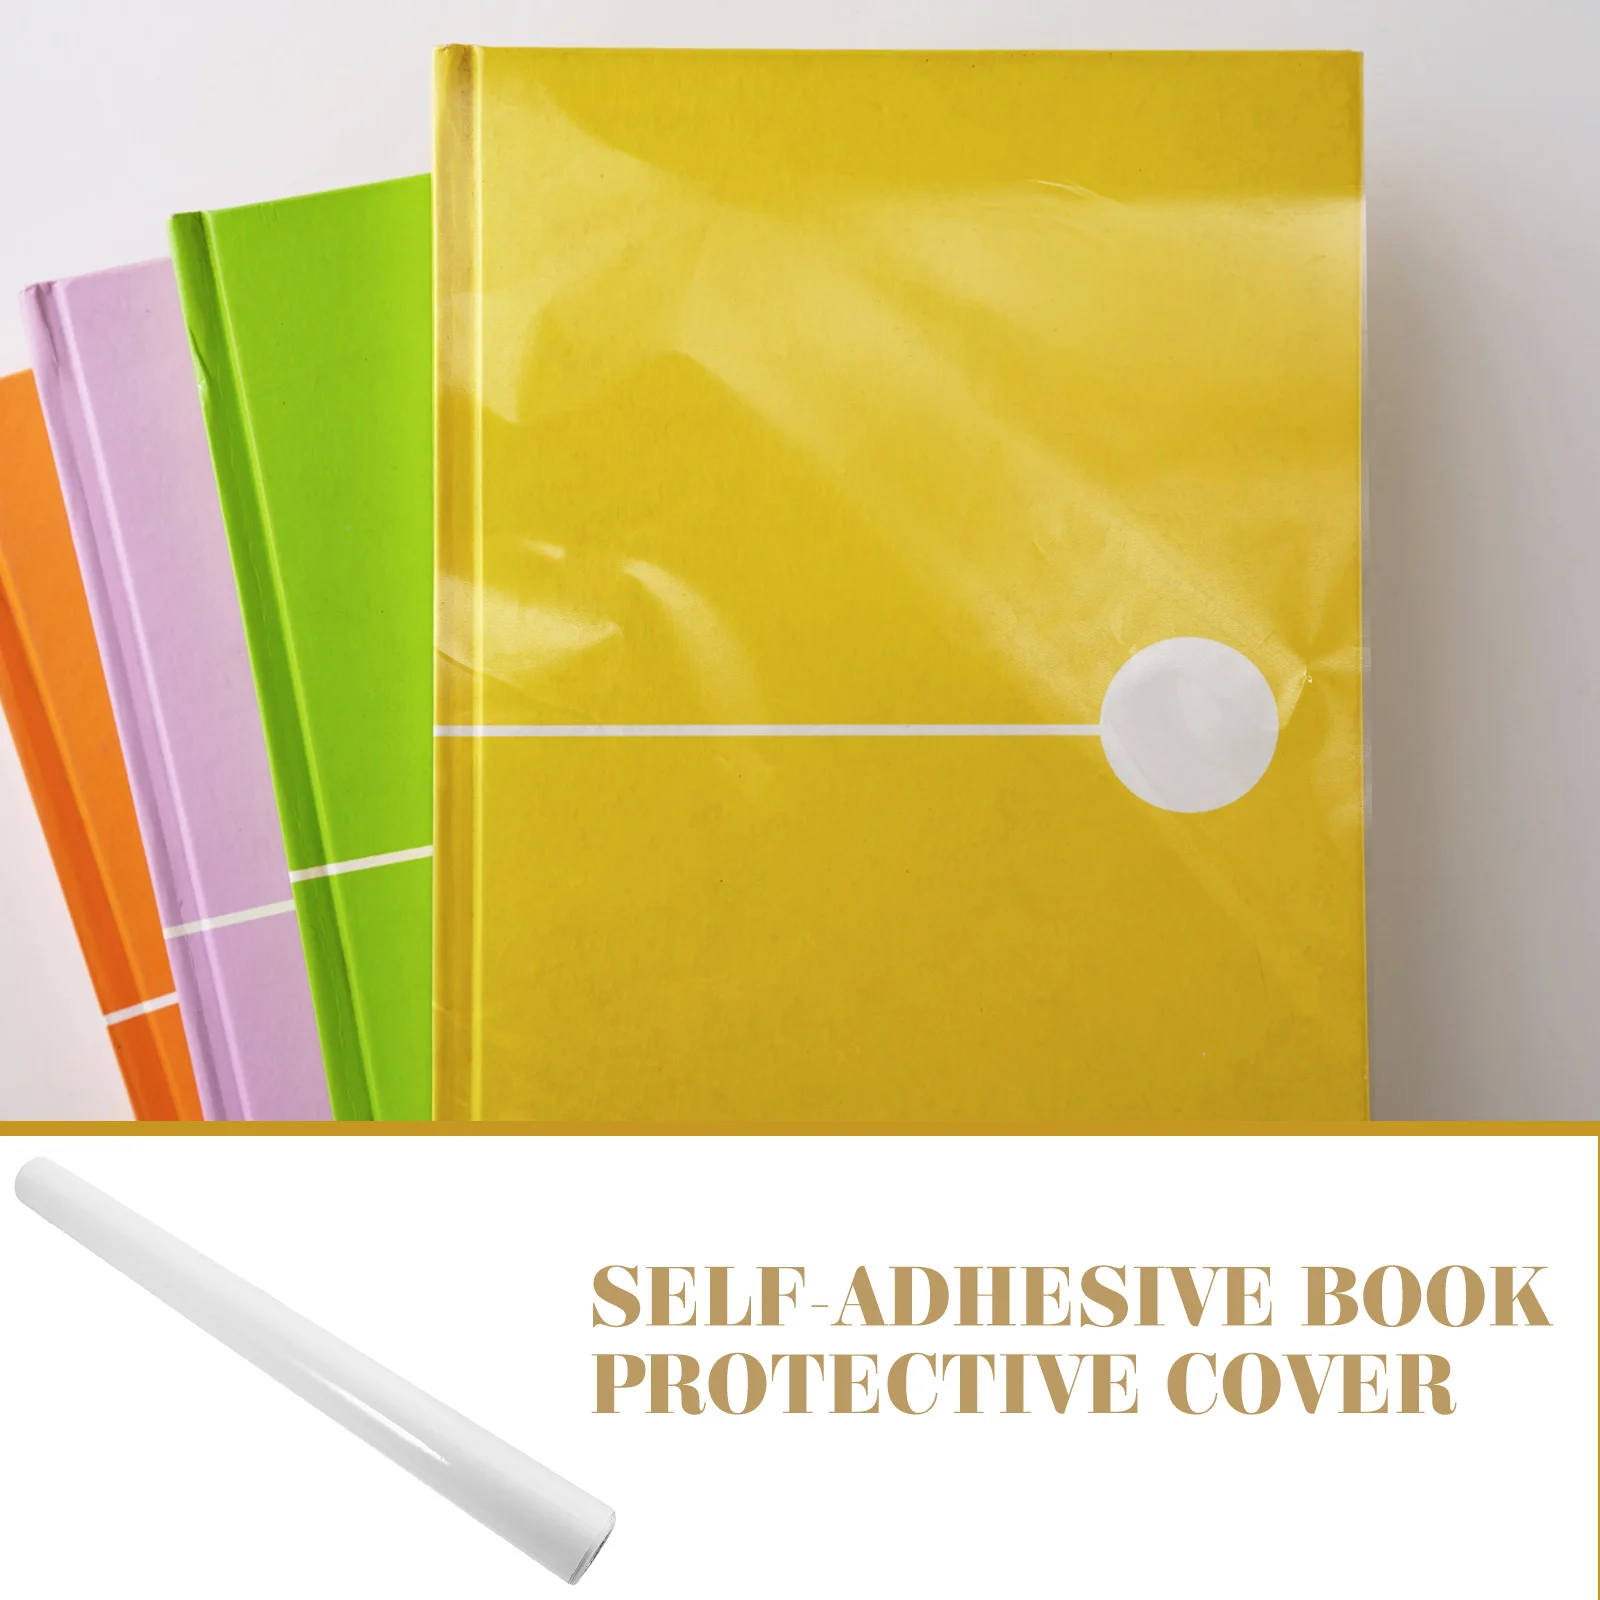 1 Roll of Self-Adhesive Protection Paper Book Cover Paper Book Cover Notebook Transparent Cover Anti-wear Book Cover